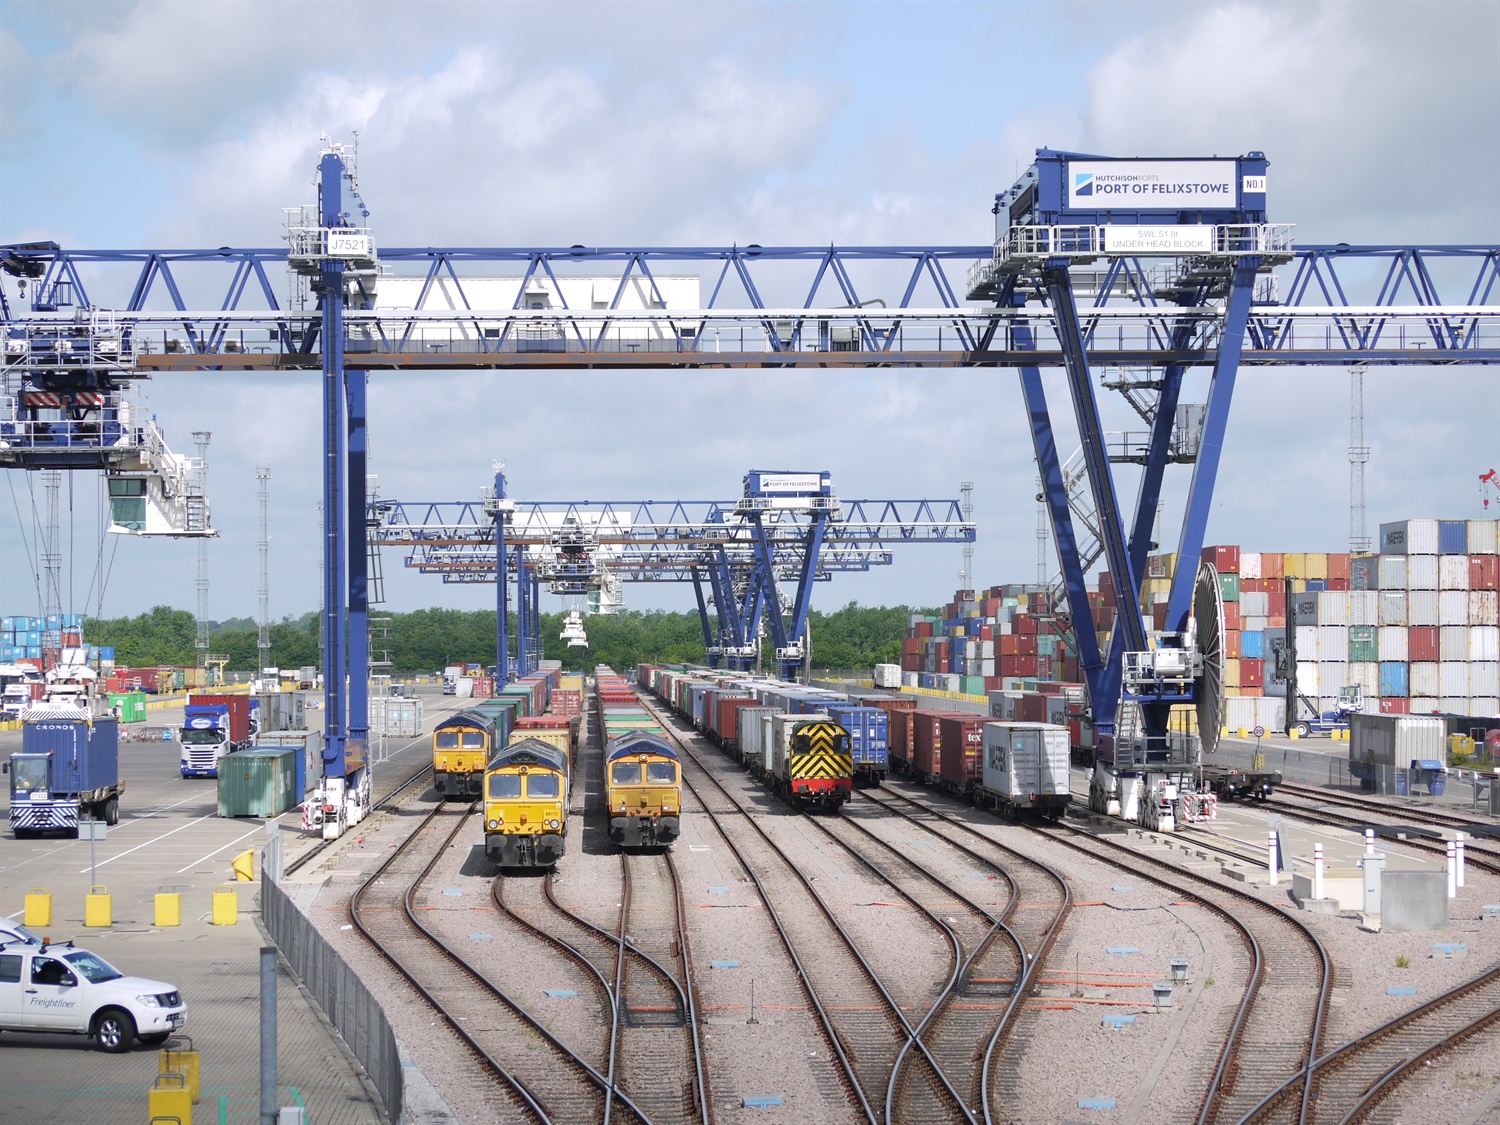 Go-ahead for Felixstowe branch line upgrade to boost freight capacity